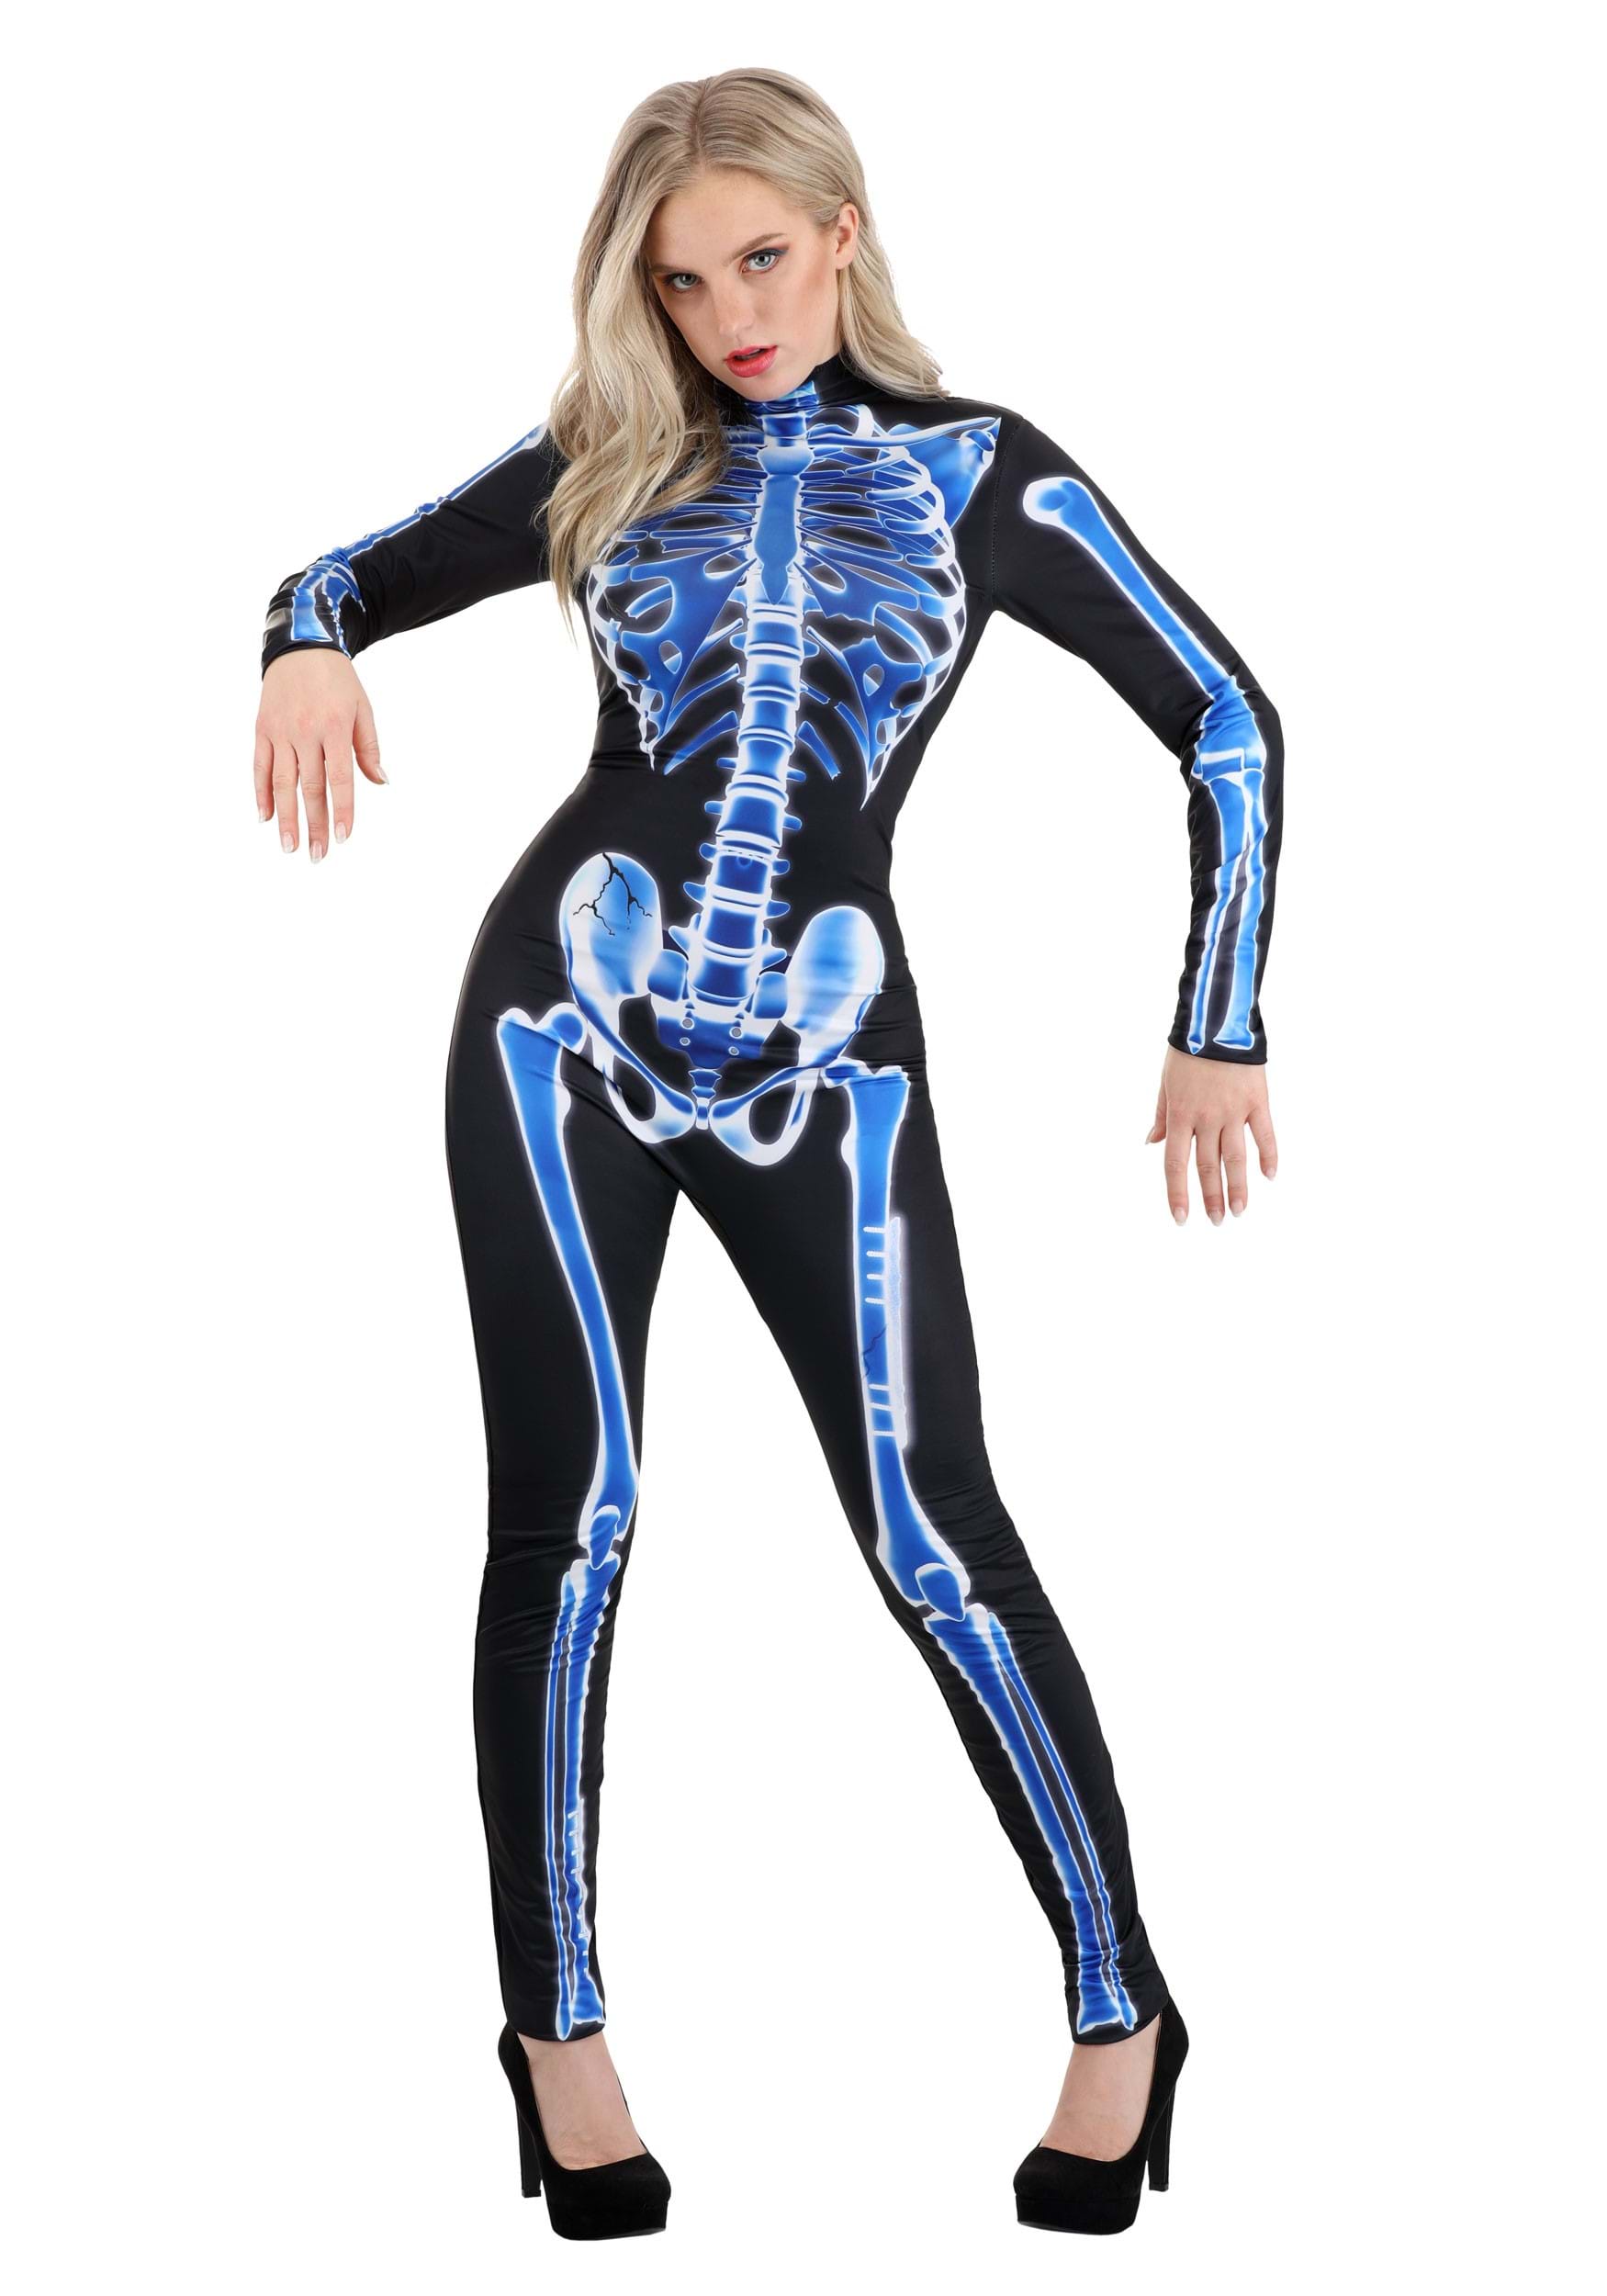 X-Ray Skeleton Jumpsuit Costume for Women